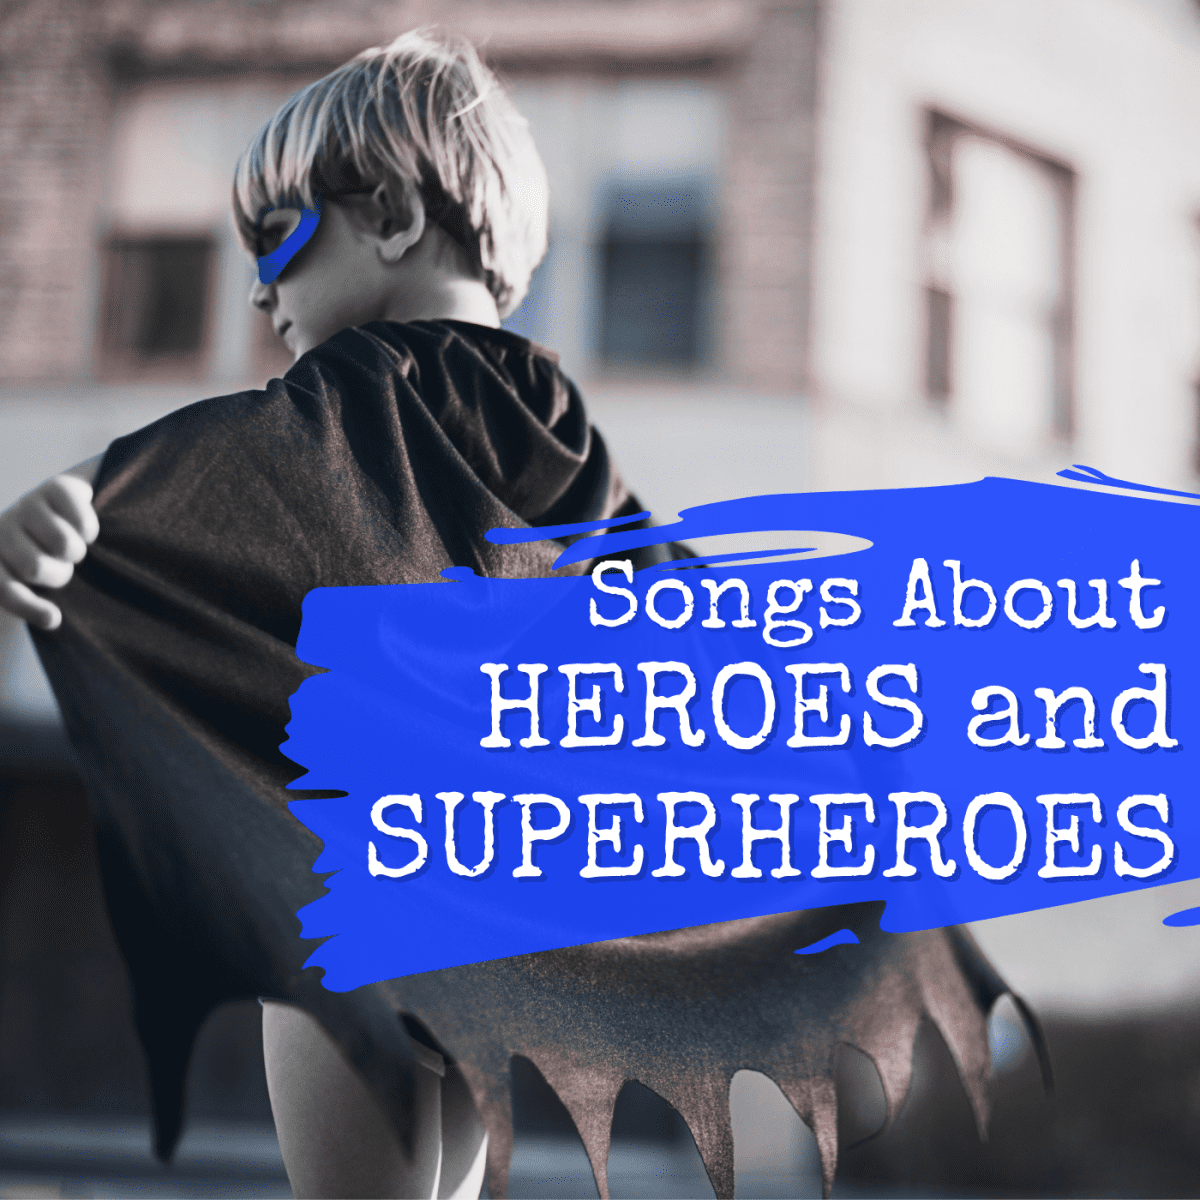 54 Songs and Superheroes - Spinditty